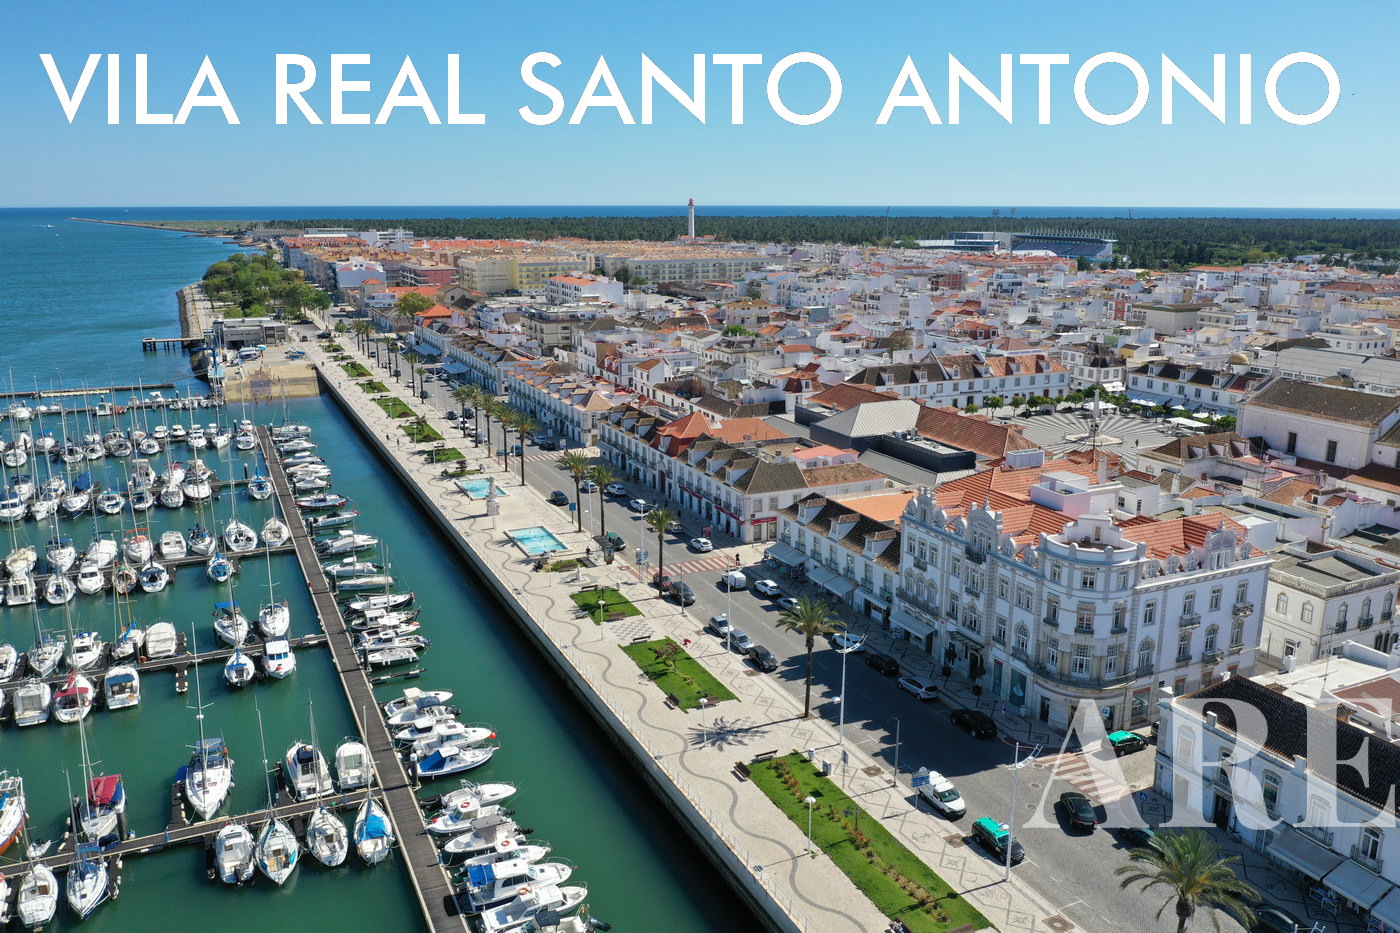 Vila Real de Santo António, The Southernmost City of Portugal